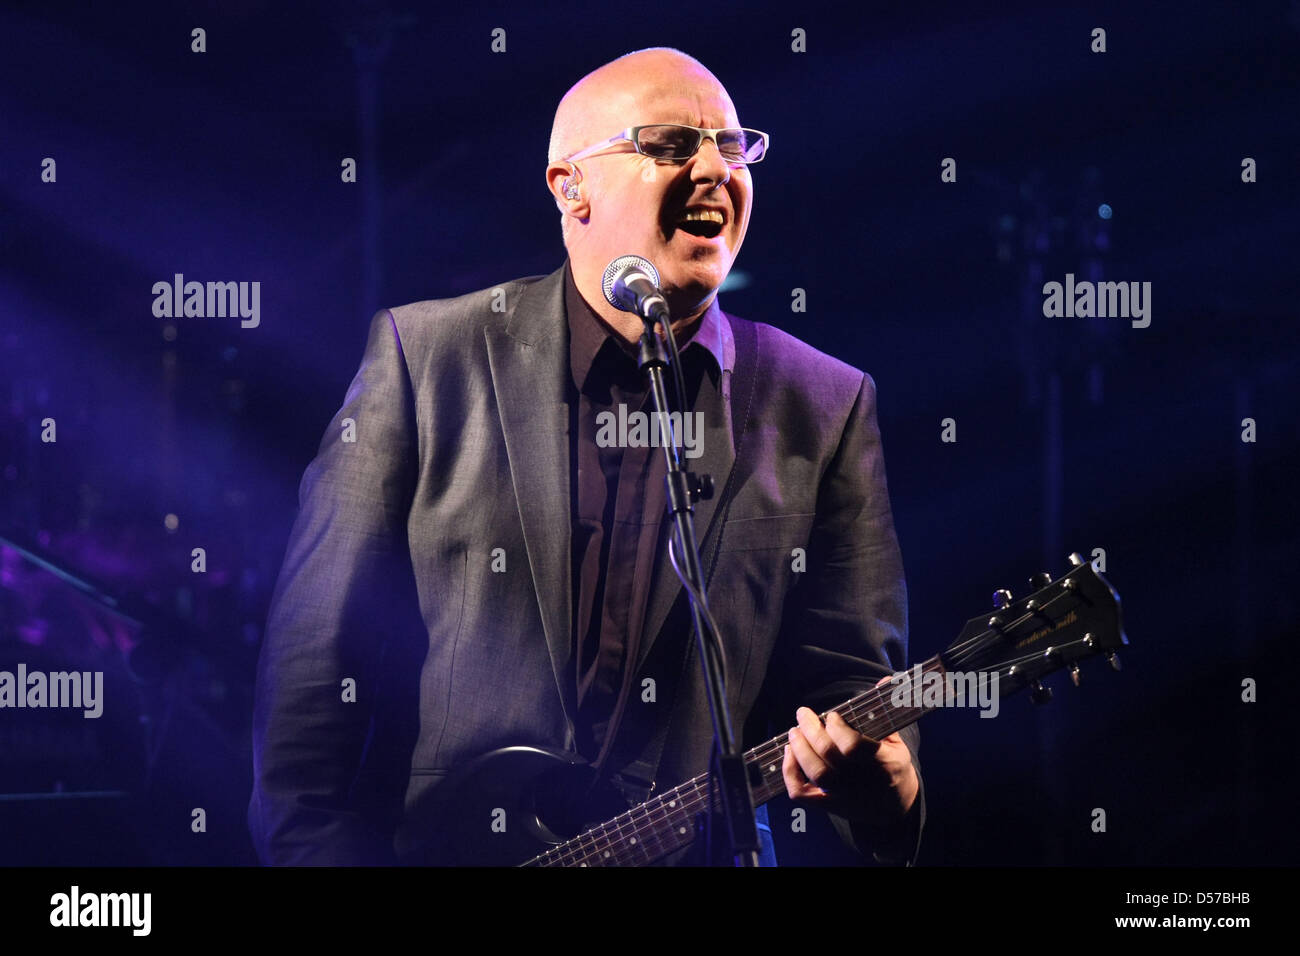 Singer Midge Ure of British band Ultravox performs on stage in Bochum ...